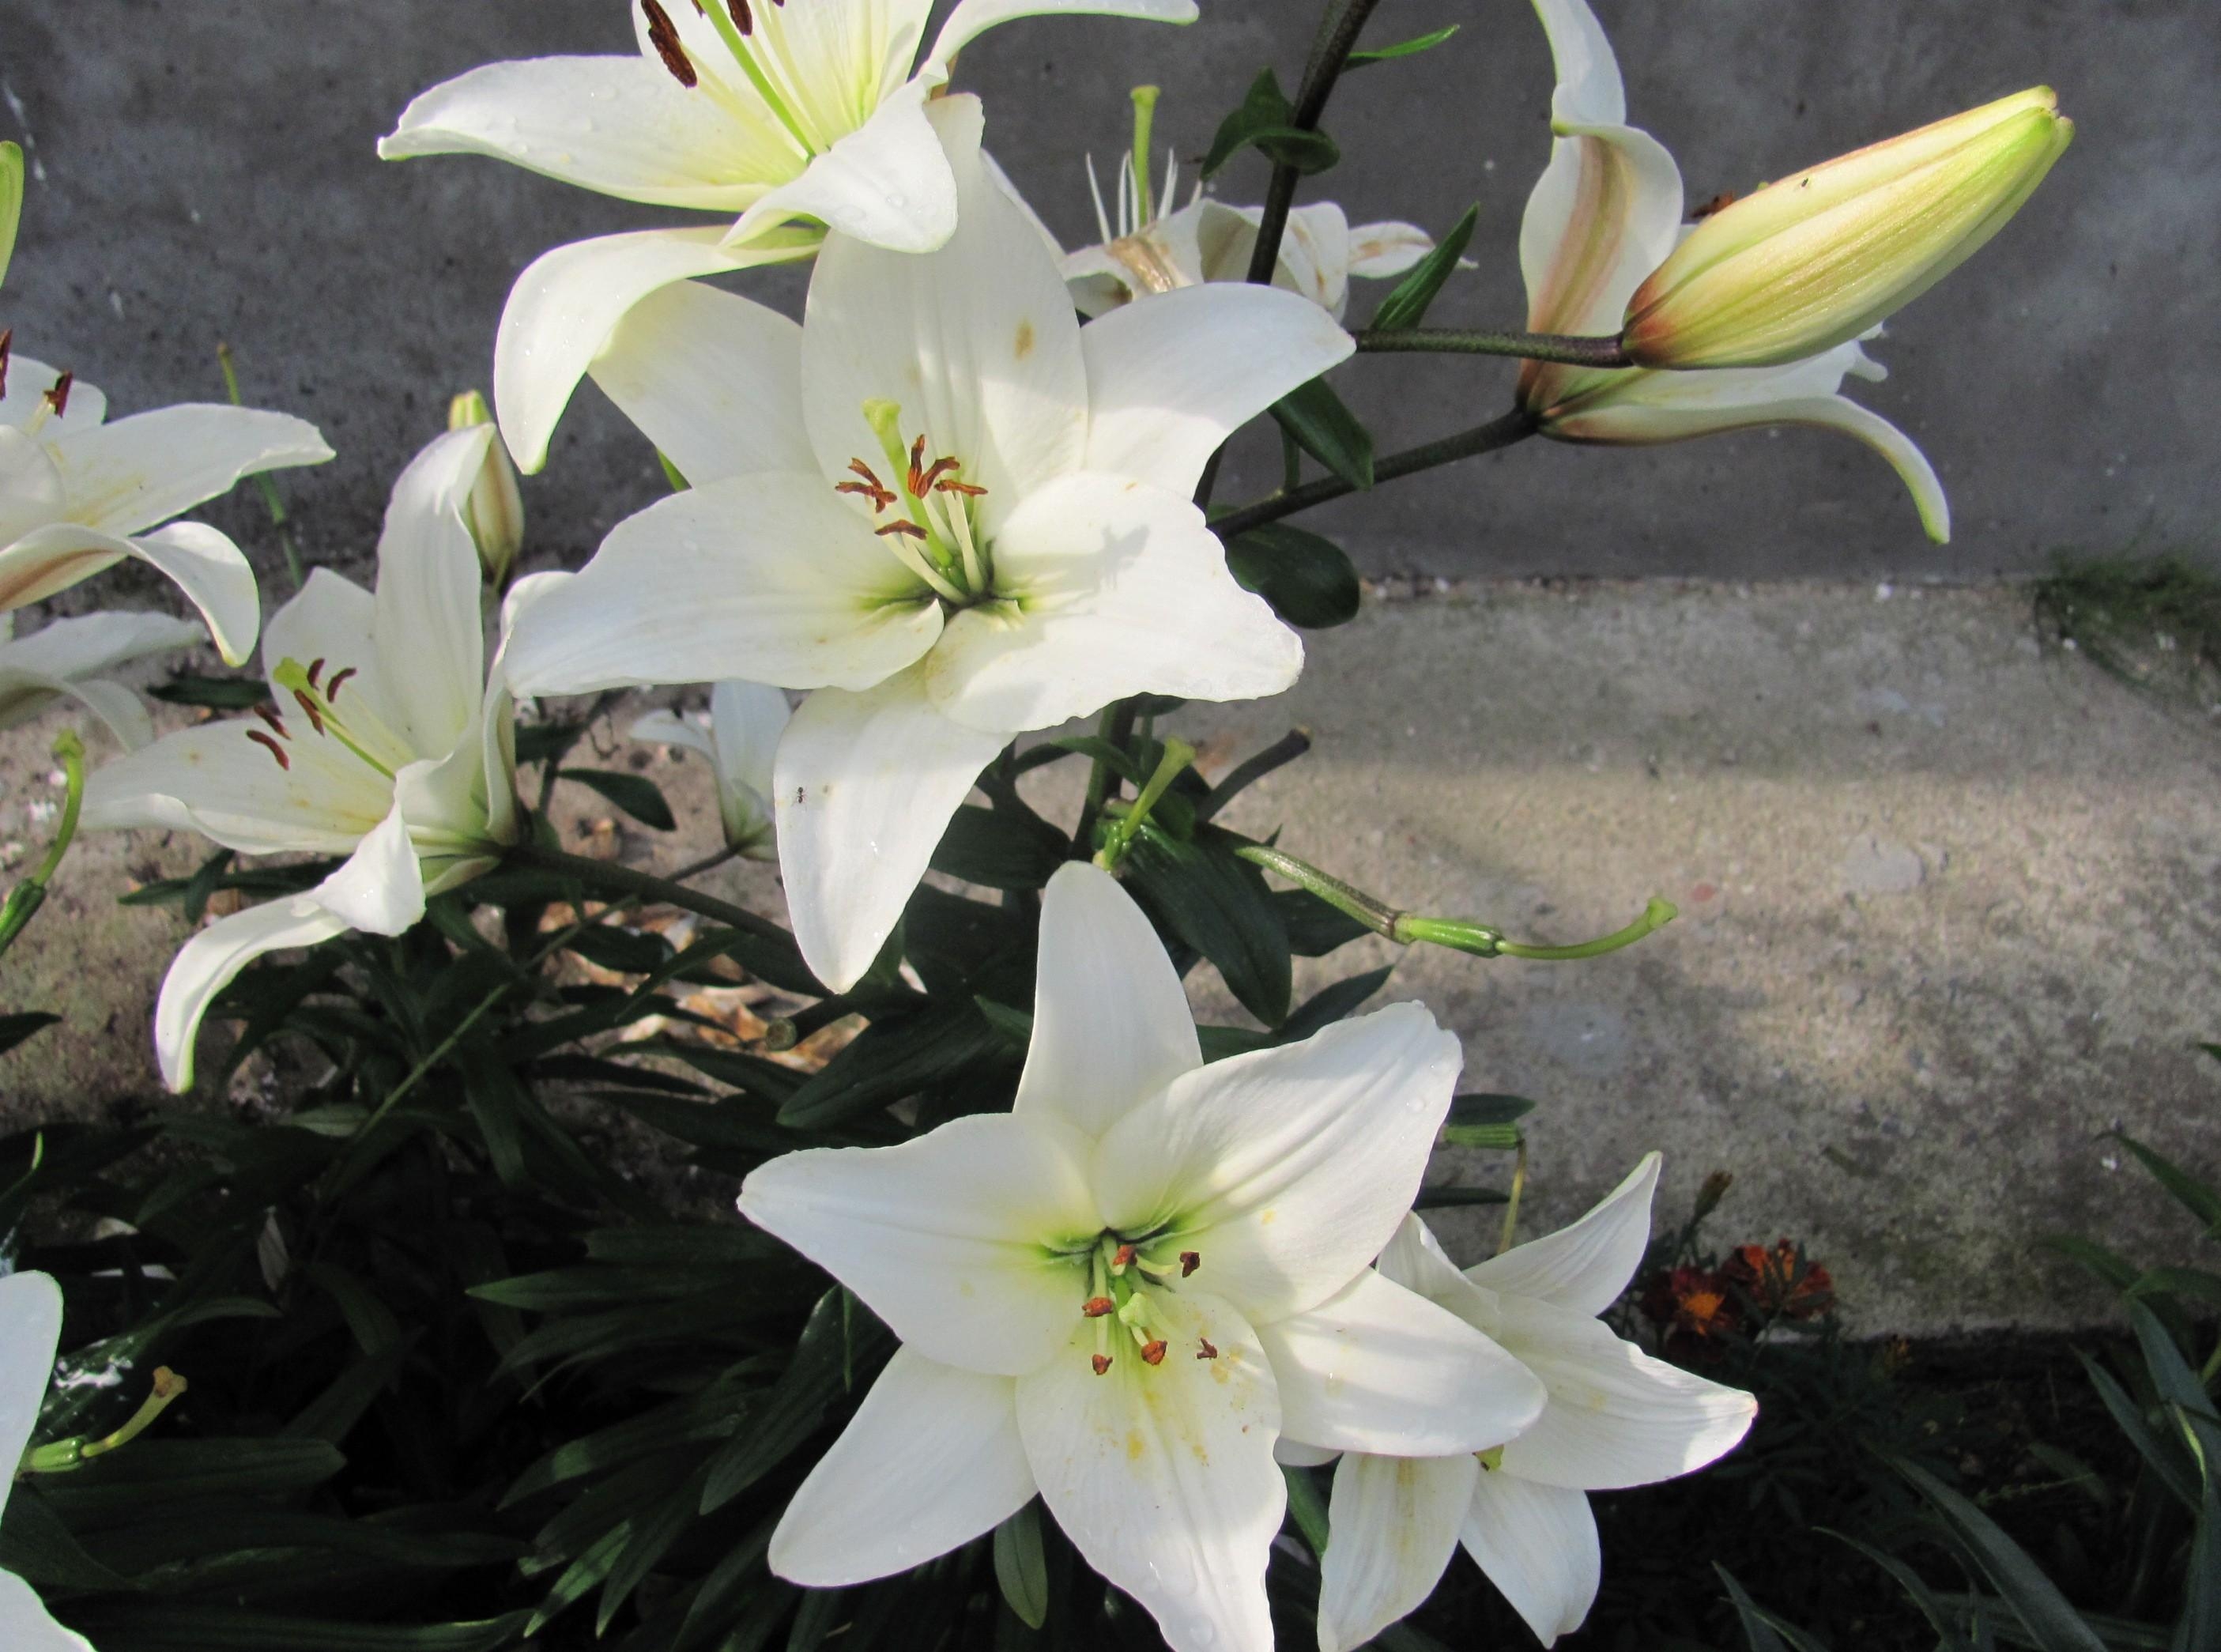 snow white, flowers, lilies, white, bud, greens, flowerbed, flower bed